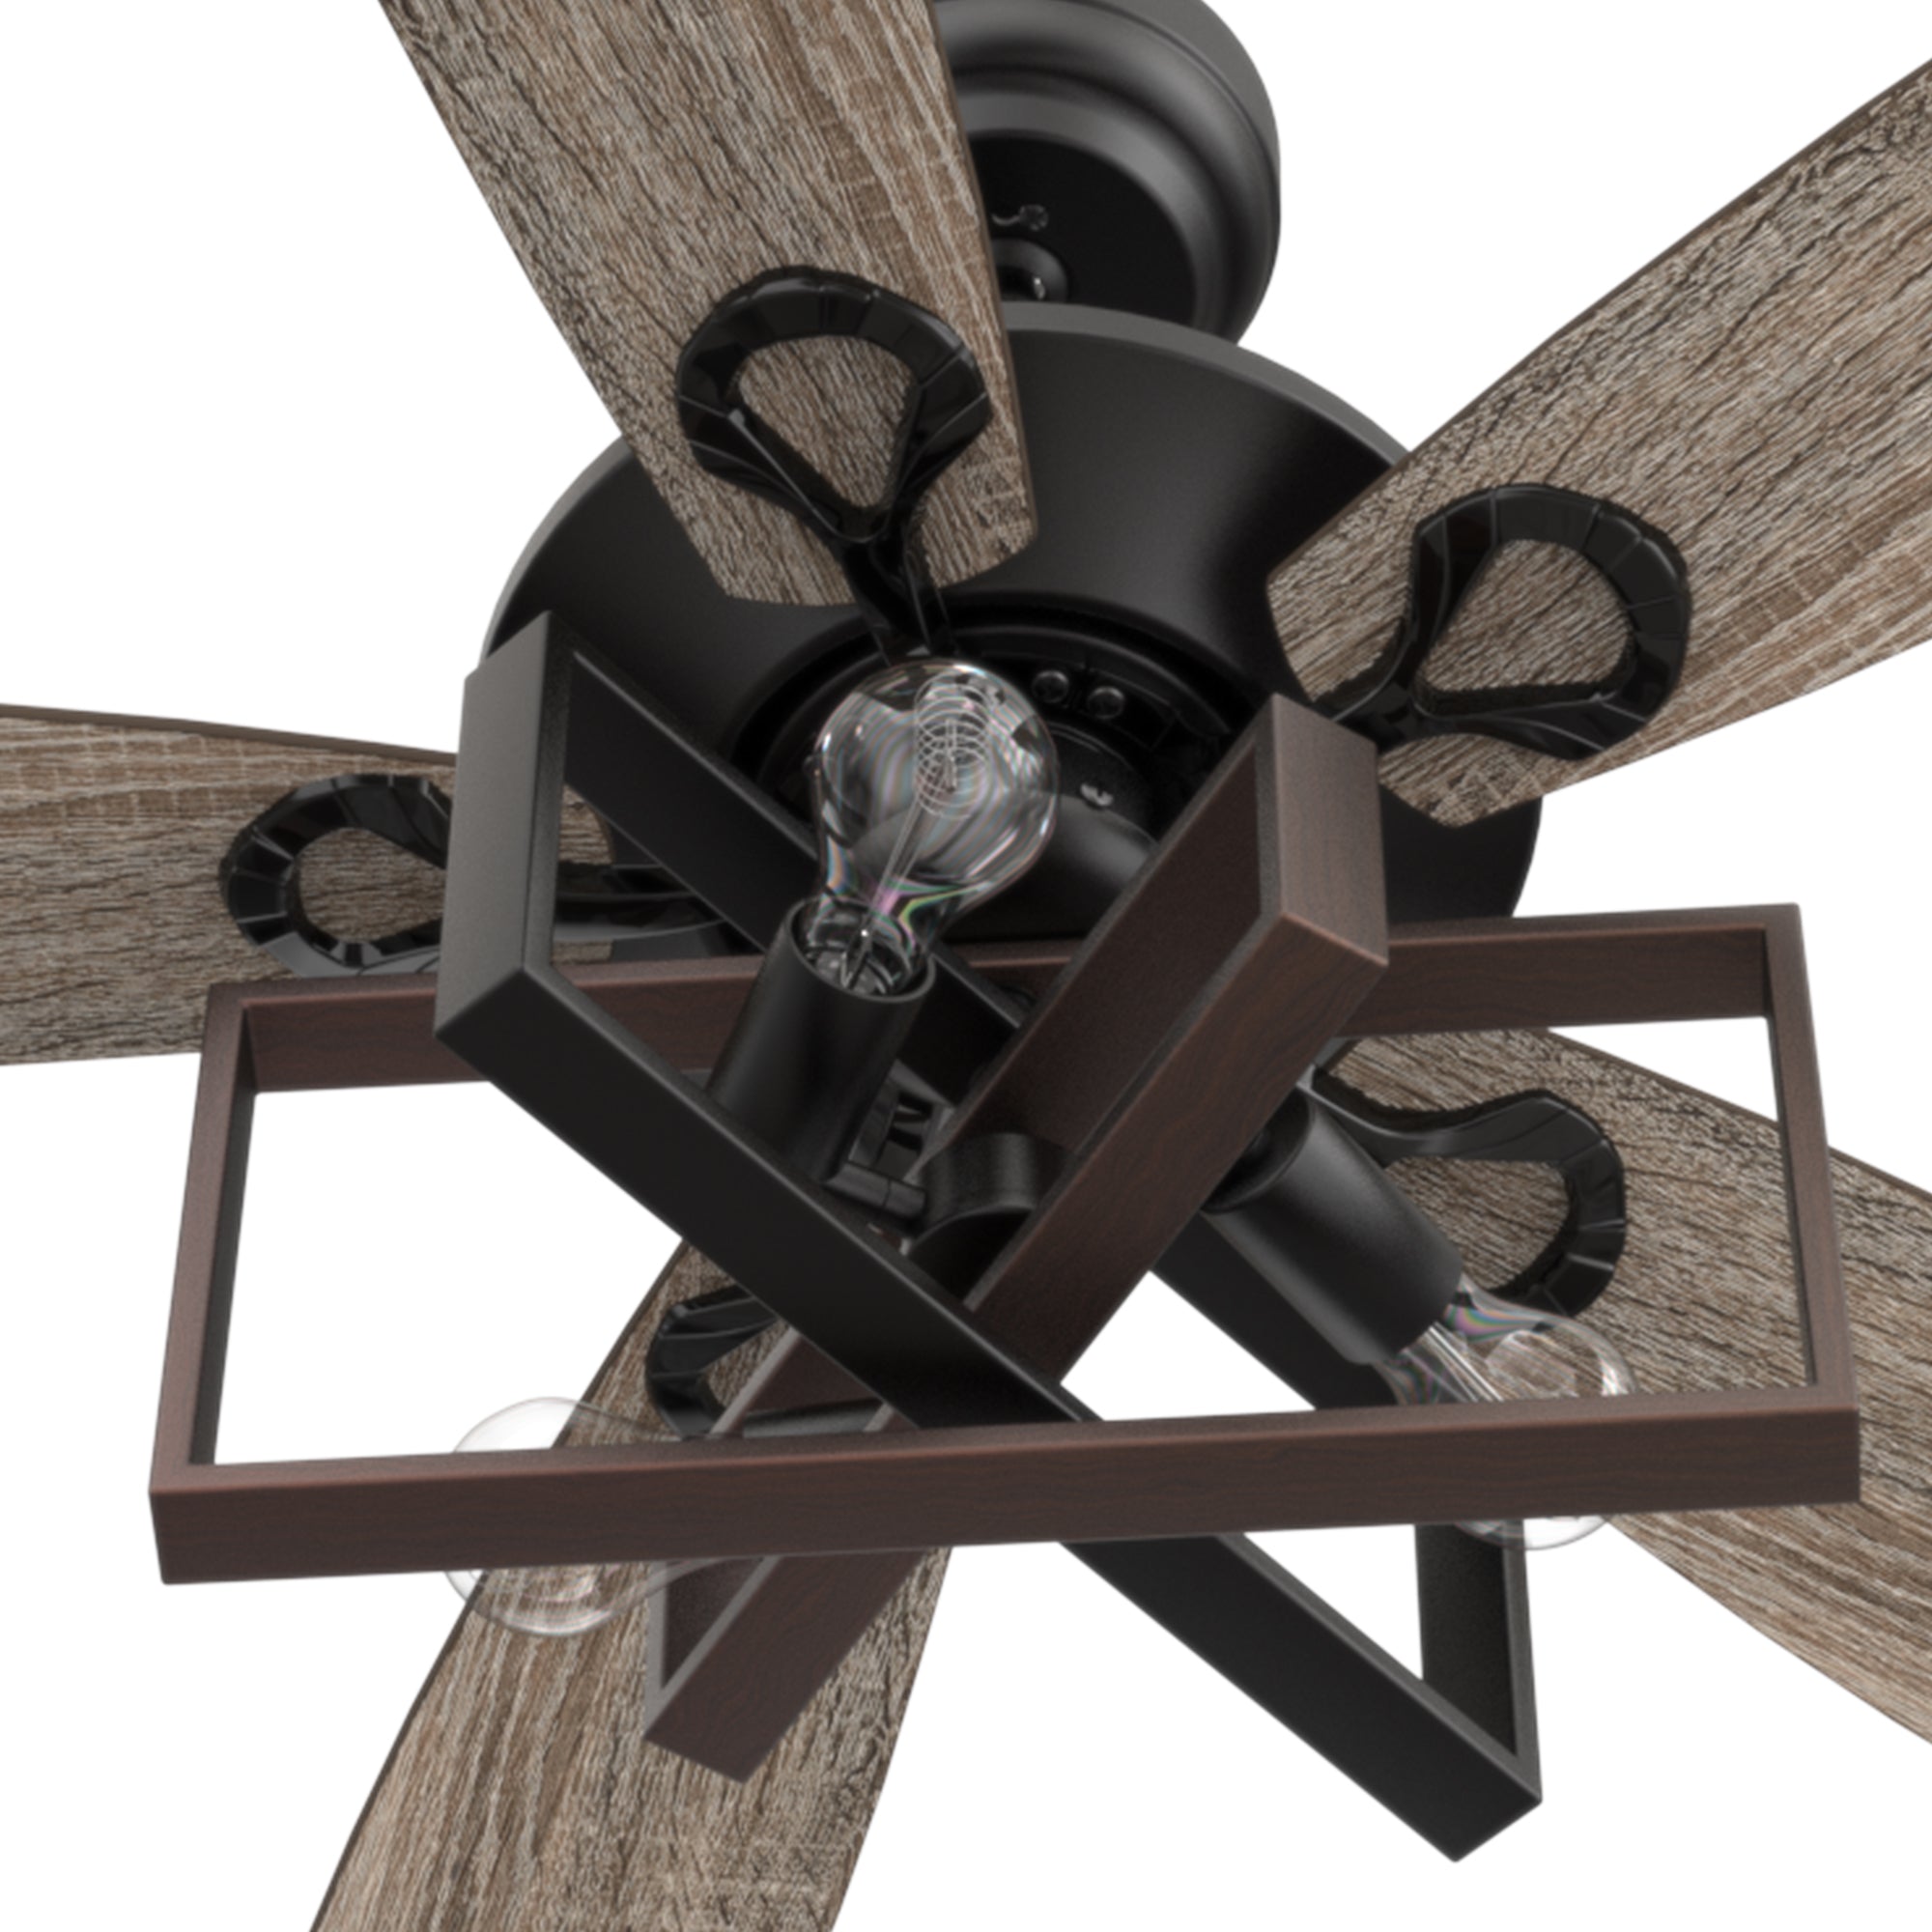 This Smafan Keller 52'' Unique Ceiling Fan keeps your space cool, bright, and stylish. It is a soft modern masterpiece perfect for your large indoor living spaces. This ceiling fan is a simplicity designing with Black finish, use elegant Plywood blades and compatible with LED bulb(Not included). The fan features remote control.